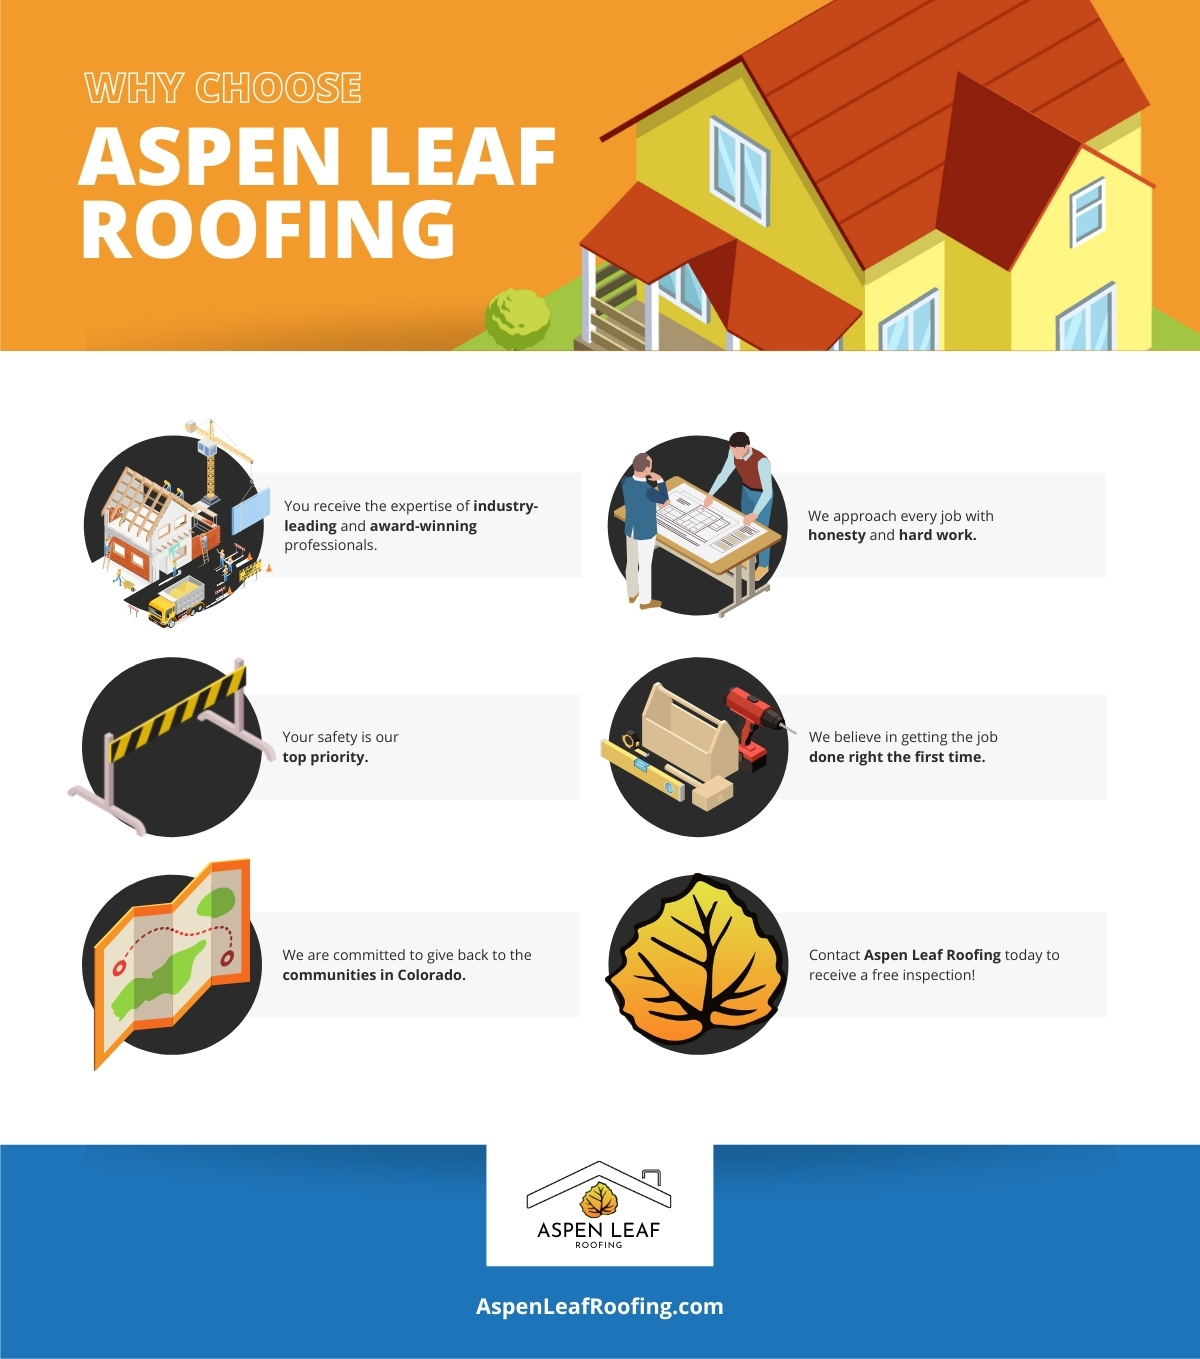 M35025 -Aspen Leaf Roofing - Infographic - What We Offer